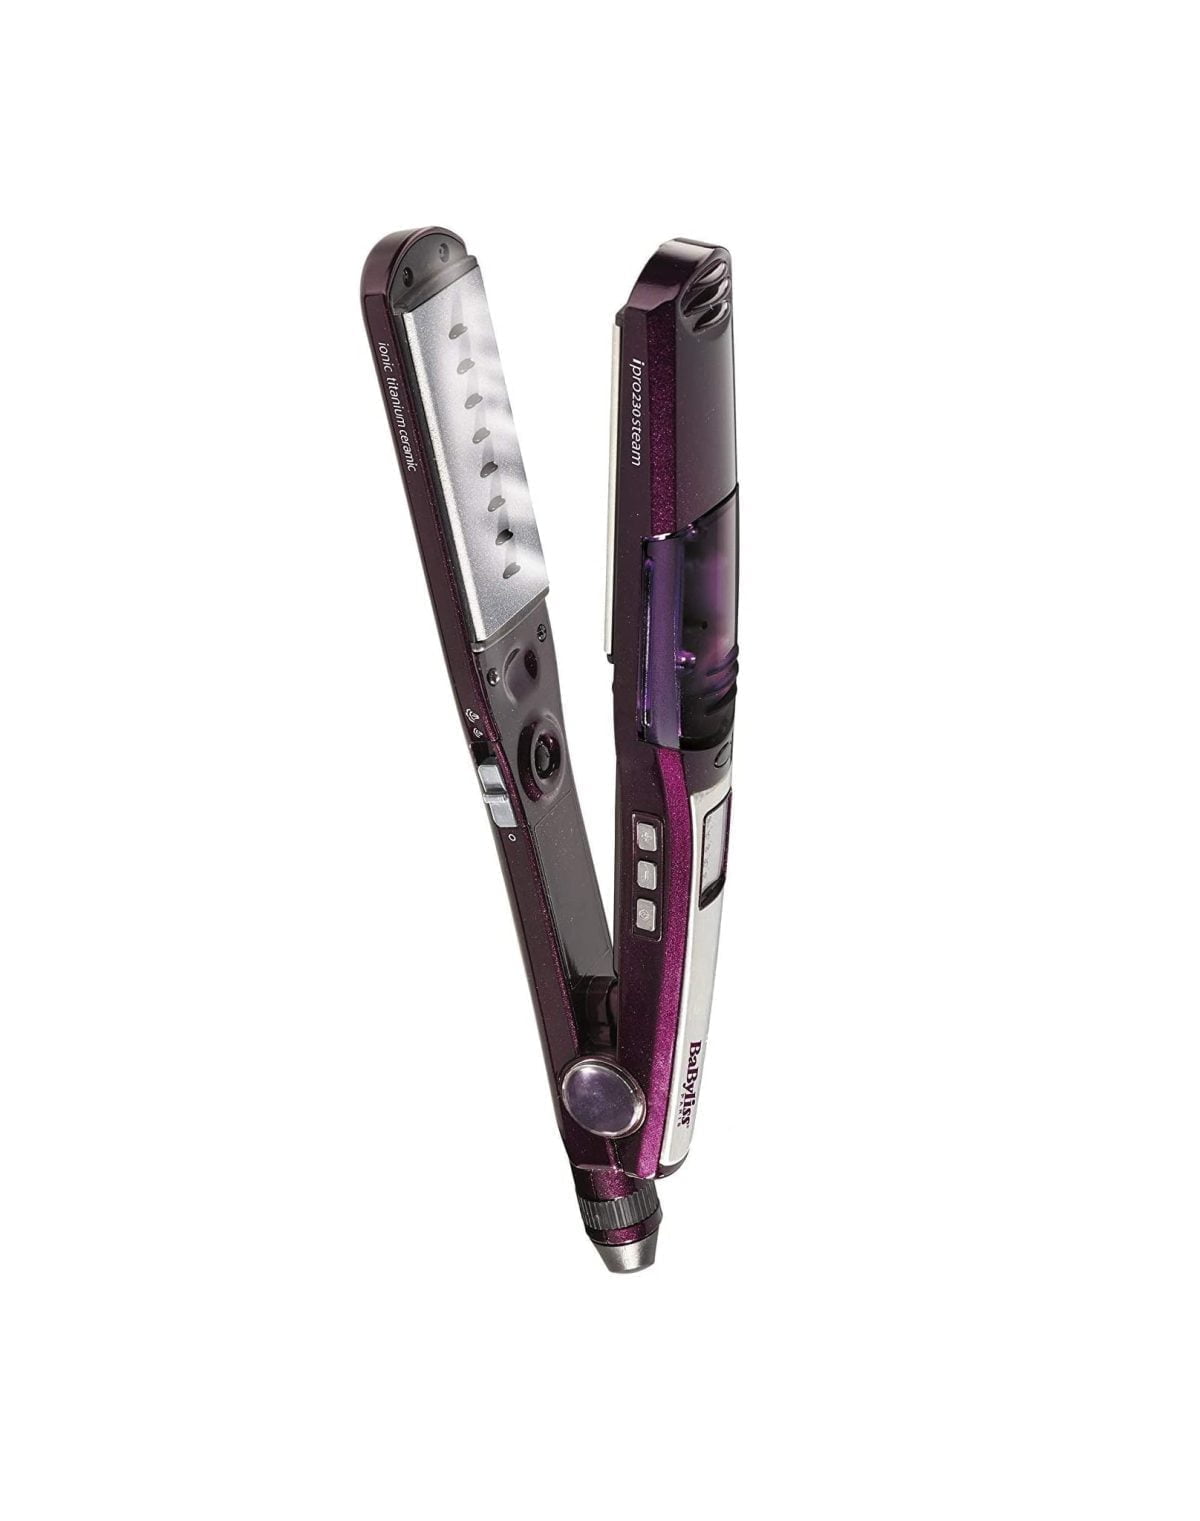 61L4Hrvstrl. Ac Sl1500 Babyliss &Lt;H1&Gt;Babyliss 369 St395E Hair Straightener Ipro 230 Steam, Purple&Lt;/H1&Gt; Https://Www.youtube.com/Watch?V=Zoyqrbmdgyg &Lt;Ul Class=&Quot;A-Unordered-List A-Vertical A-Spacing-Mini&Quot;&Gt; &Lt;Li&Gt;&Lt;Span Class=&Quot;A-List-Item&Quot;&Gt; Effect : Smooth &Lt;/Span&Gt;&Lt;/Li&Gt; &Lt;Li&Gt;&Lt;Span Class=&Quot;A-List-Item&Quot;&Gt; Maximum Temperature: 230 ° C &Lt;/Span&Gt;&Lt;/Li&Gt; &Lt;Li&Gt;&Lt;Span Class=&Quot;A-List-Item&Quot;&Gt; The Steam Hydrate The Hair And Relaxes The Hair Fiber For Hair 4 Times Smoother , 2 Times Longer In One Pass ! &Lt;/Span&Gt;&Lt;/Li&Gt; &Lt;Li&Gt;&Lt;Span Class=&Quot;A-List-Item&Quot;&Gt; Suitable For All Hair Types Even The Most Difficult To Smooth . &Lt;/Span&Gt;&Lt;/Li&Gt; &Lt;/Ul&Gt; Hair Straightener Babyliss 369 St395E Hair Straightener Ipro 230 Steam, Purple